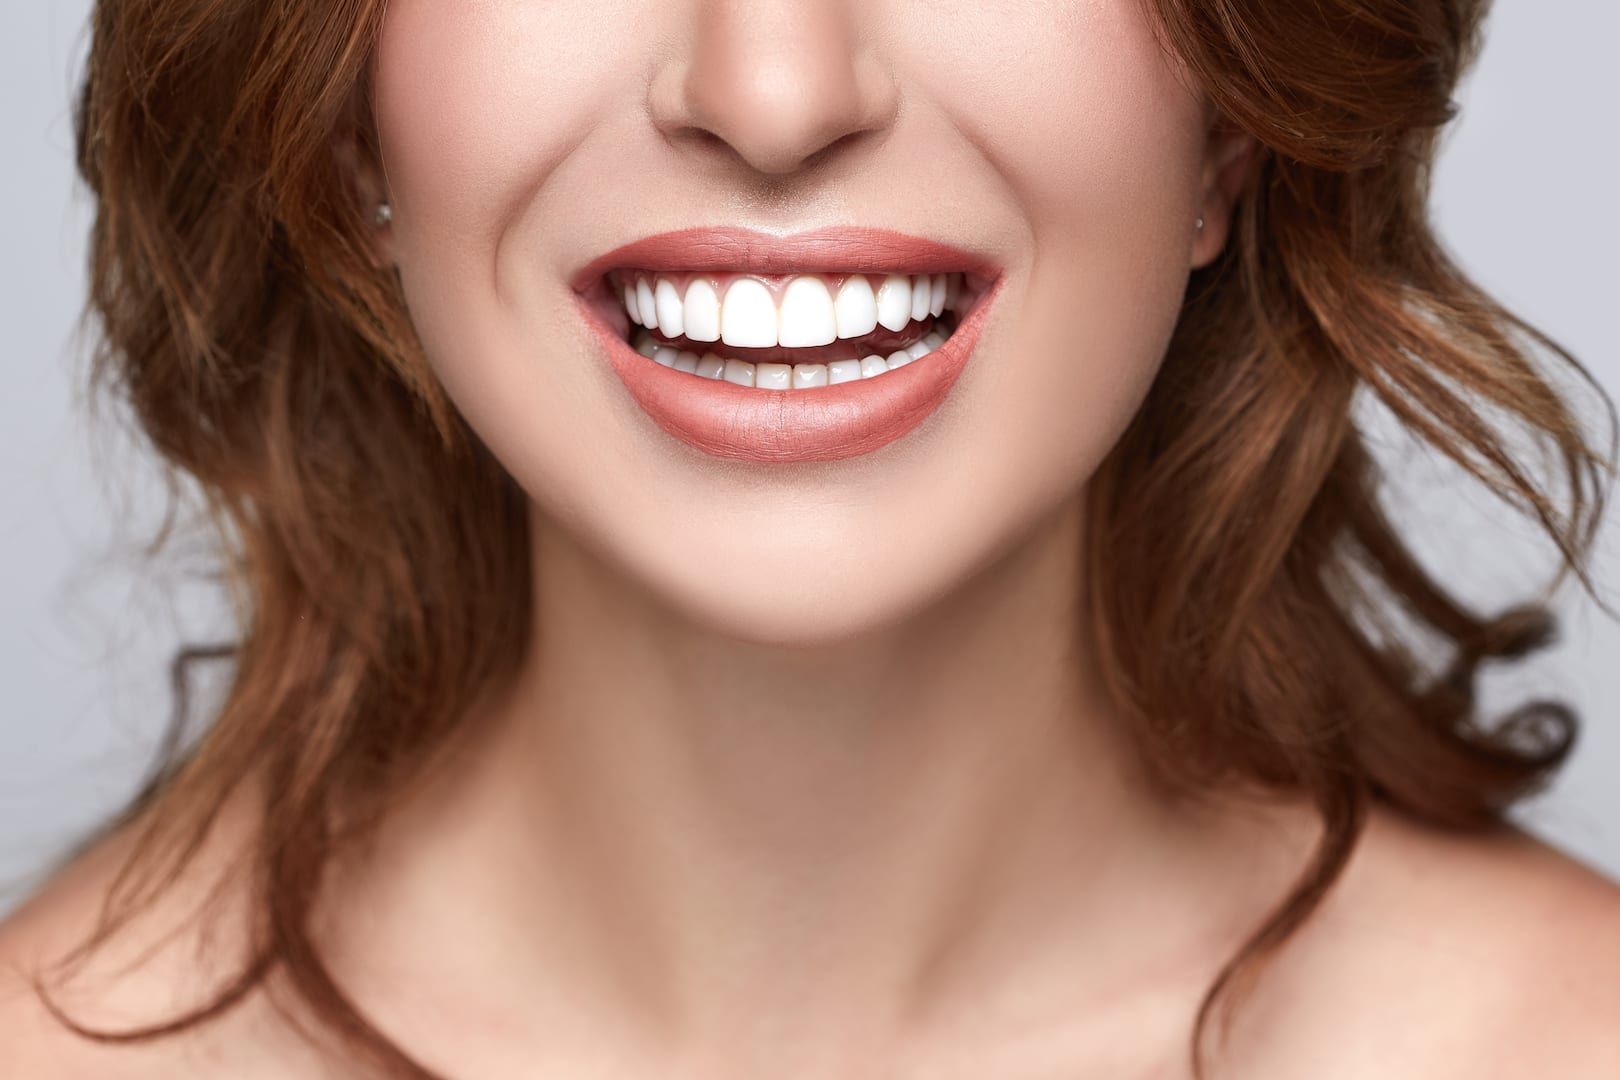 Teeth Whitening specialists at Brown Thomas